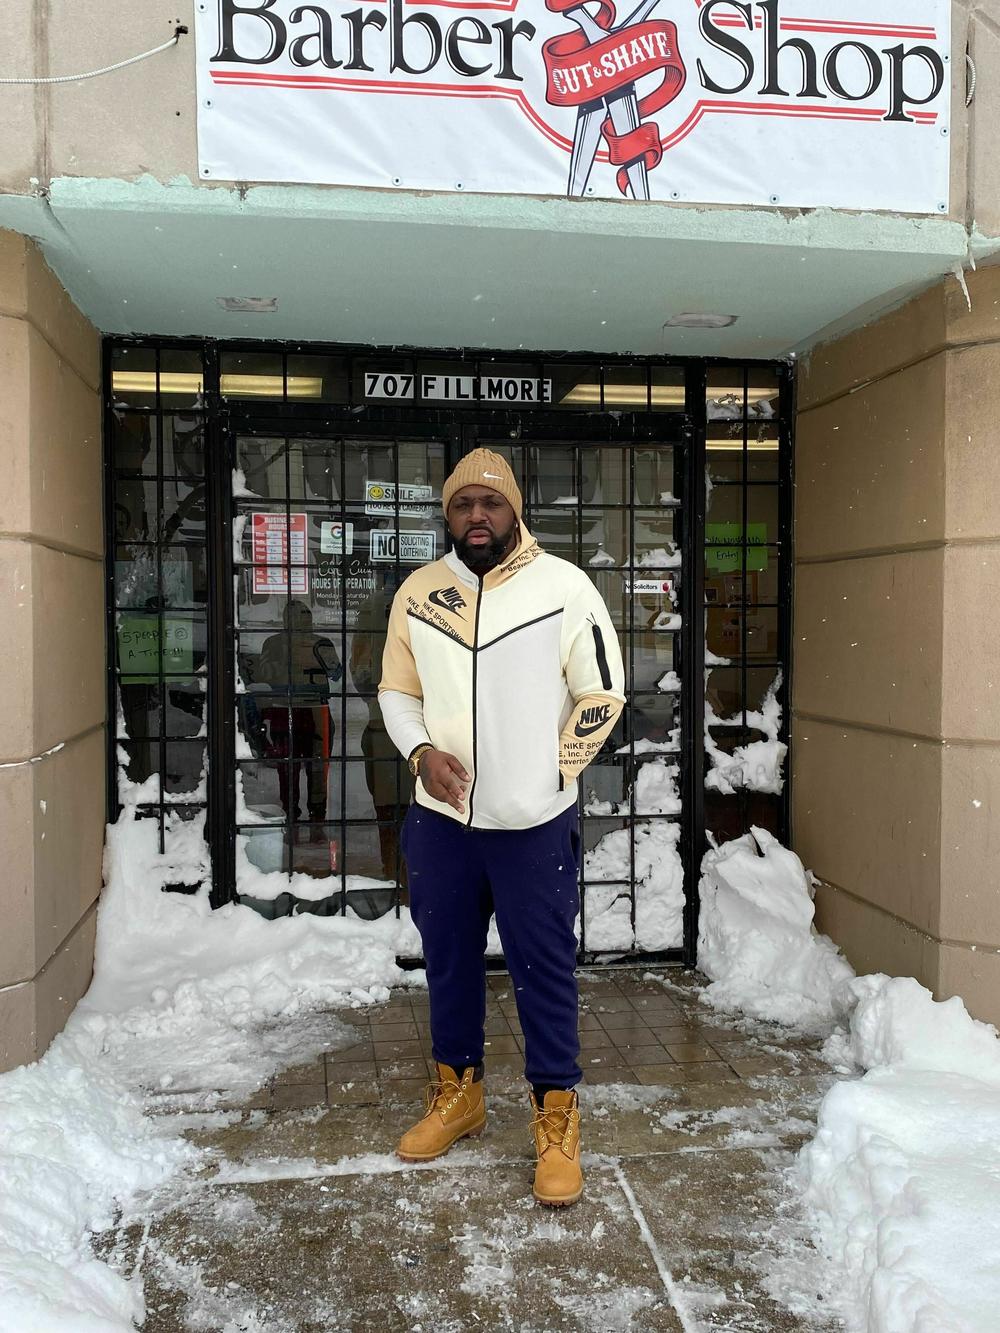 Craig Elston opened his barber shop in Buffalo to residents who lost power or were stranded by a major snow storm last week.